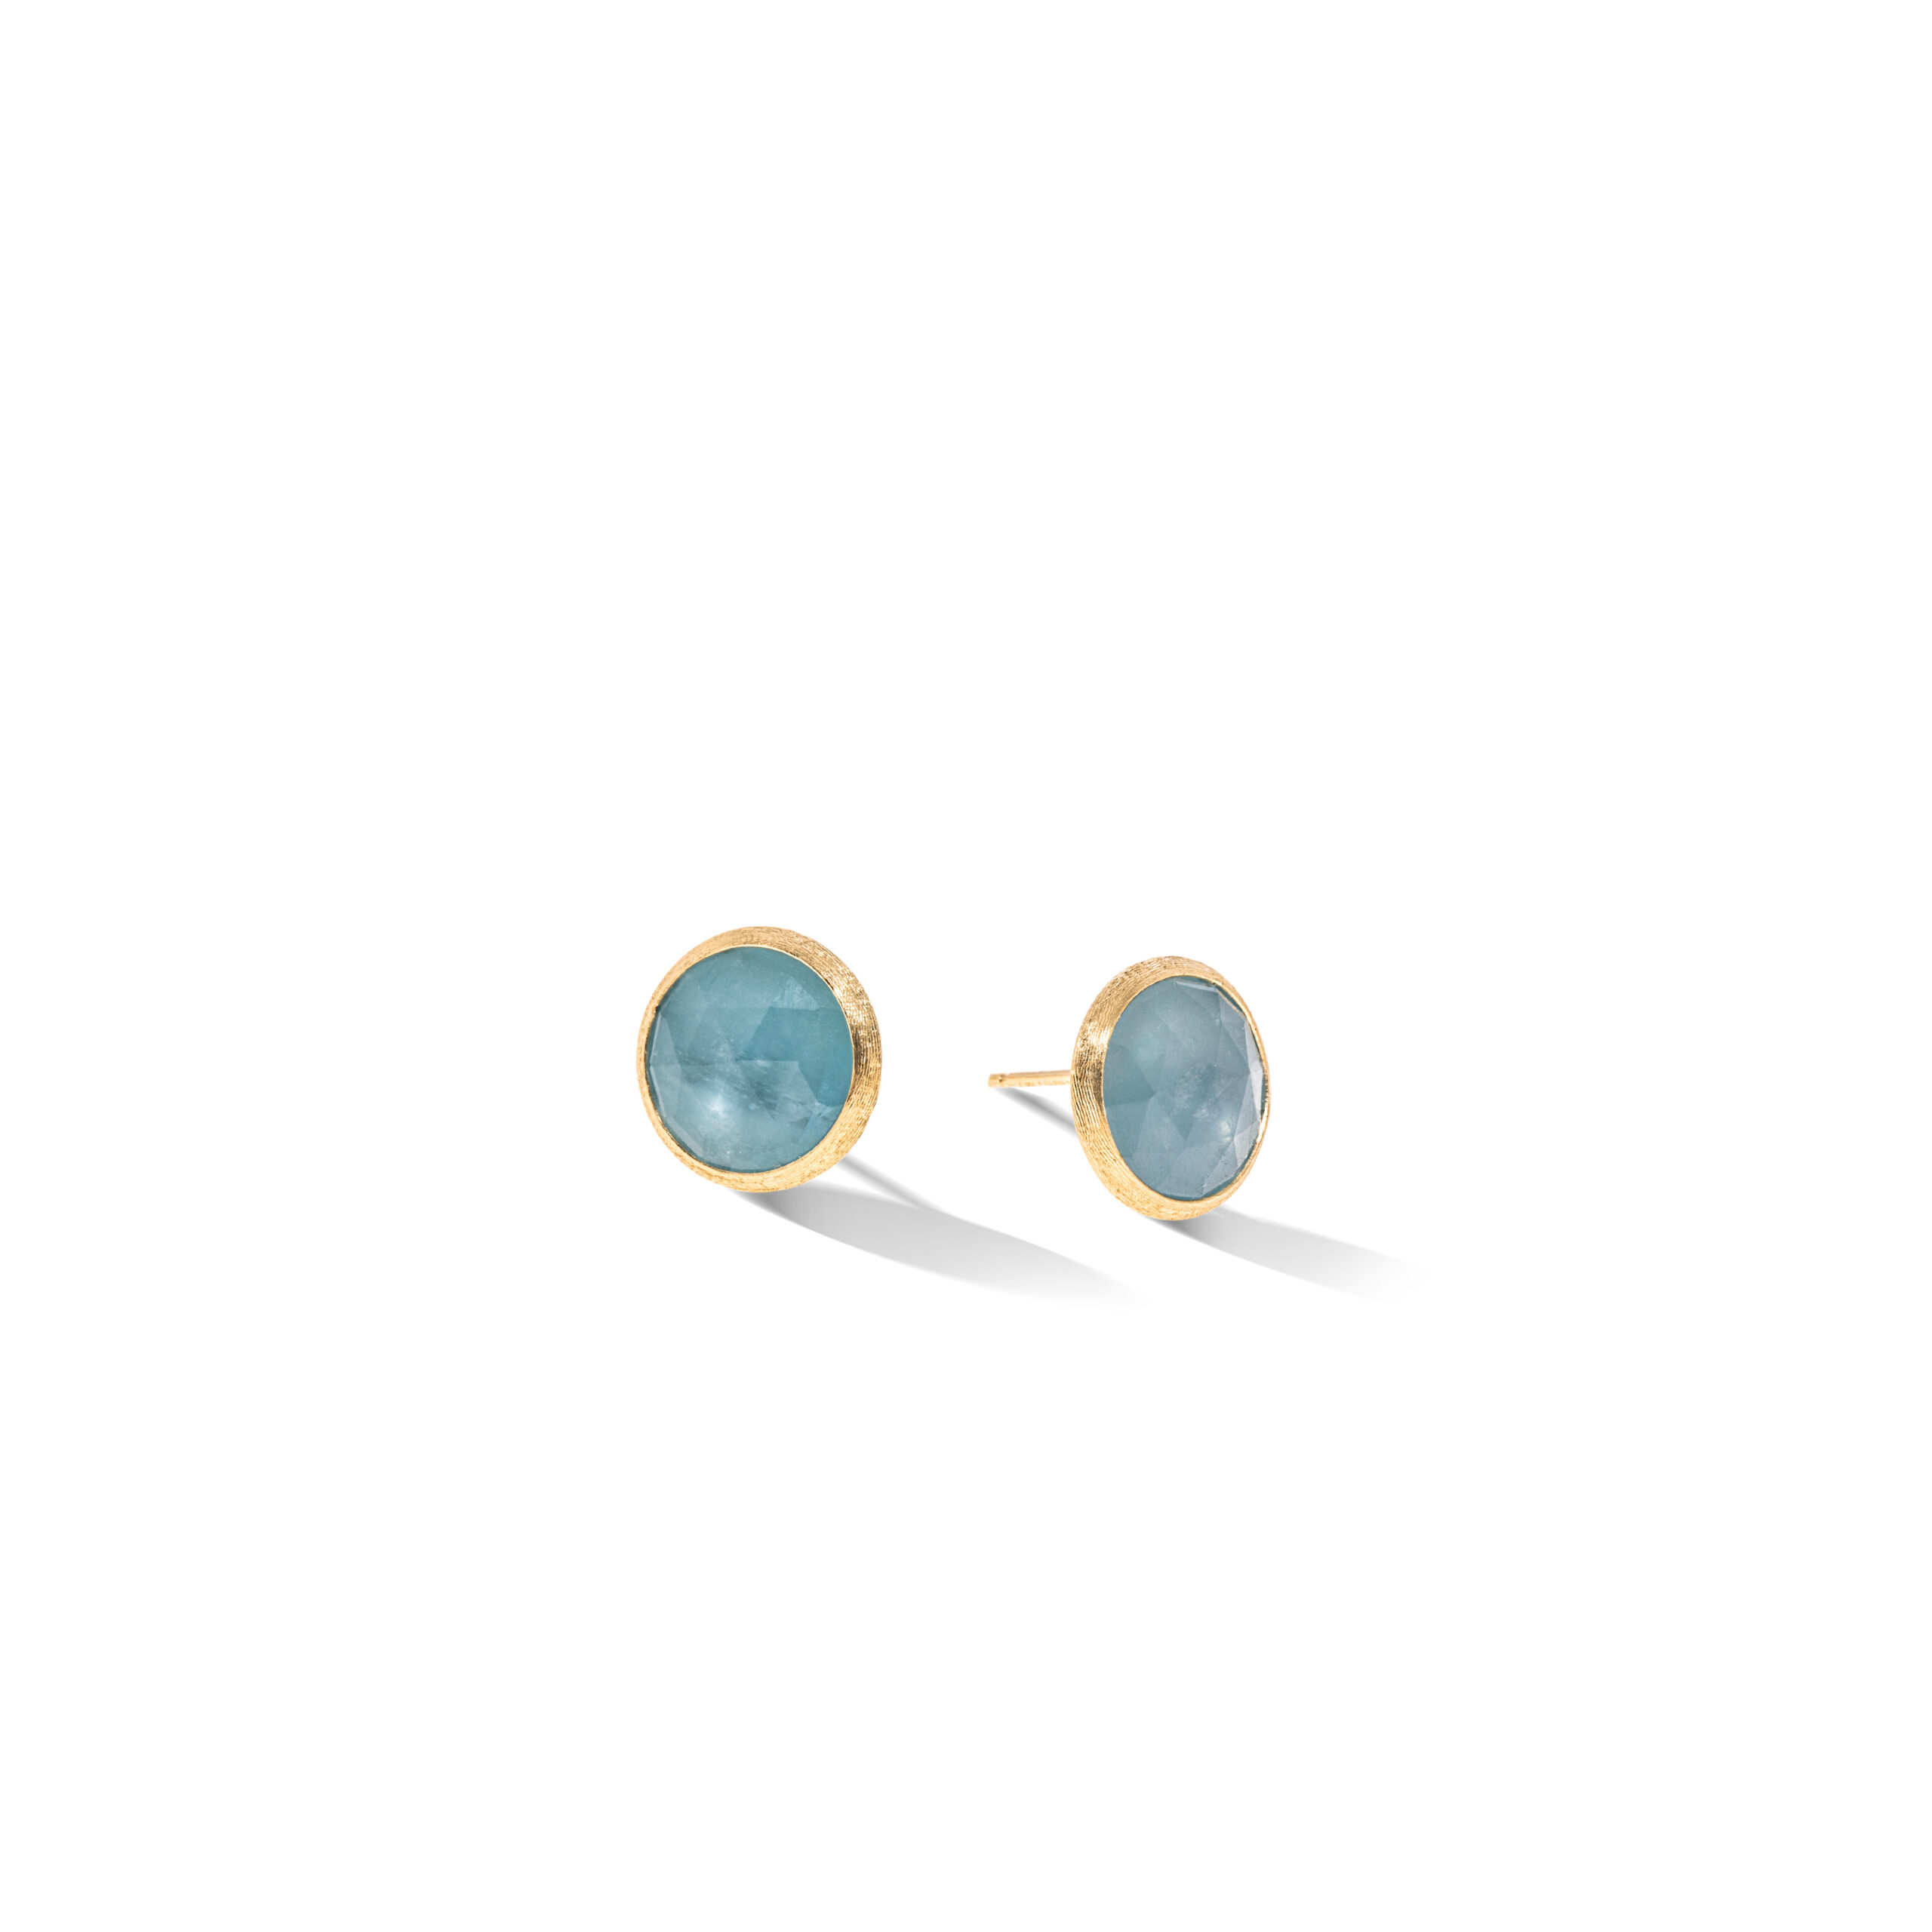 OB1739 AQ01 Y 02Marco Bicego Jaipur Color Collection 18k Yellow Gold and Aquamarine Large Stud